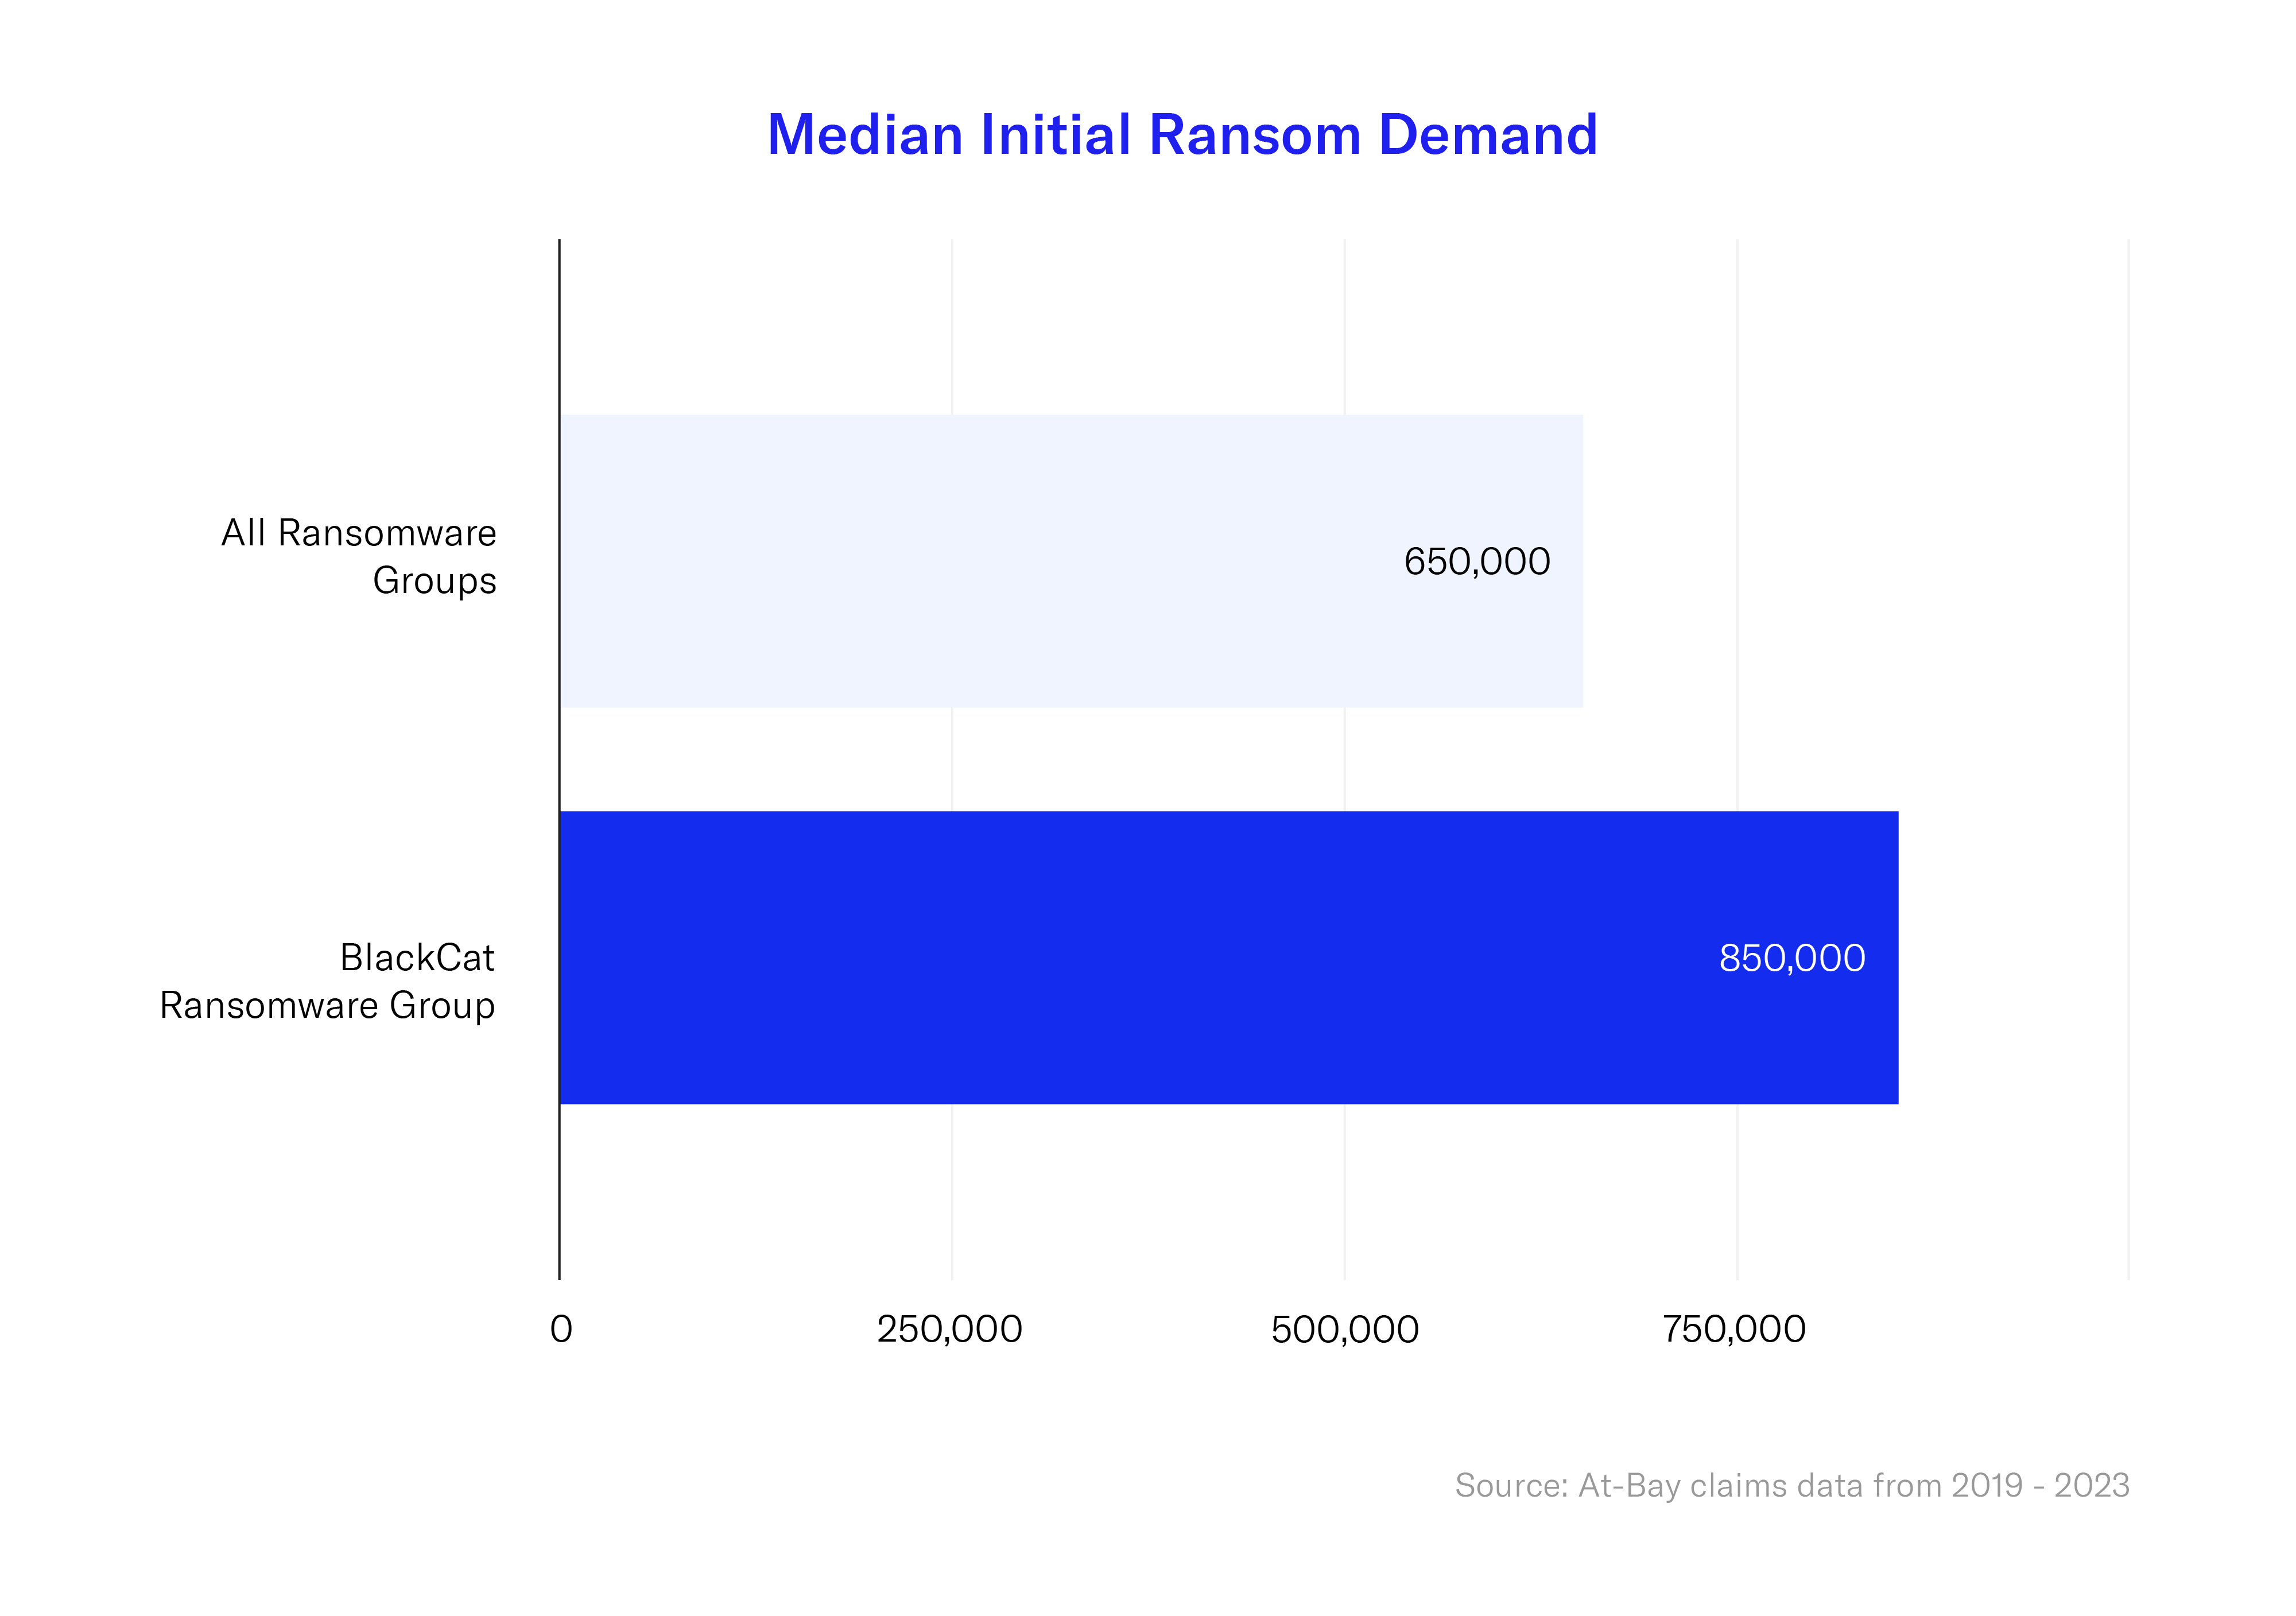 Median initial ransom demand of BlackCat vs. other ransomware groups